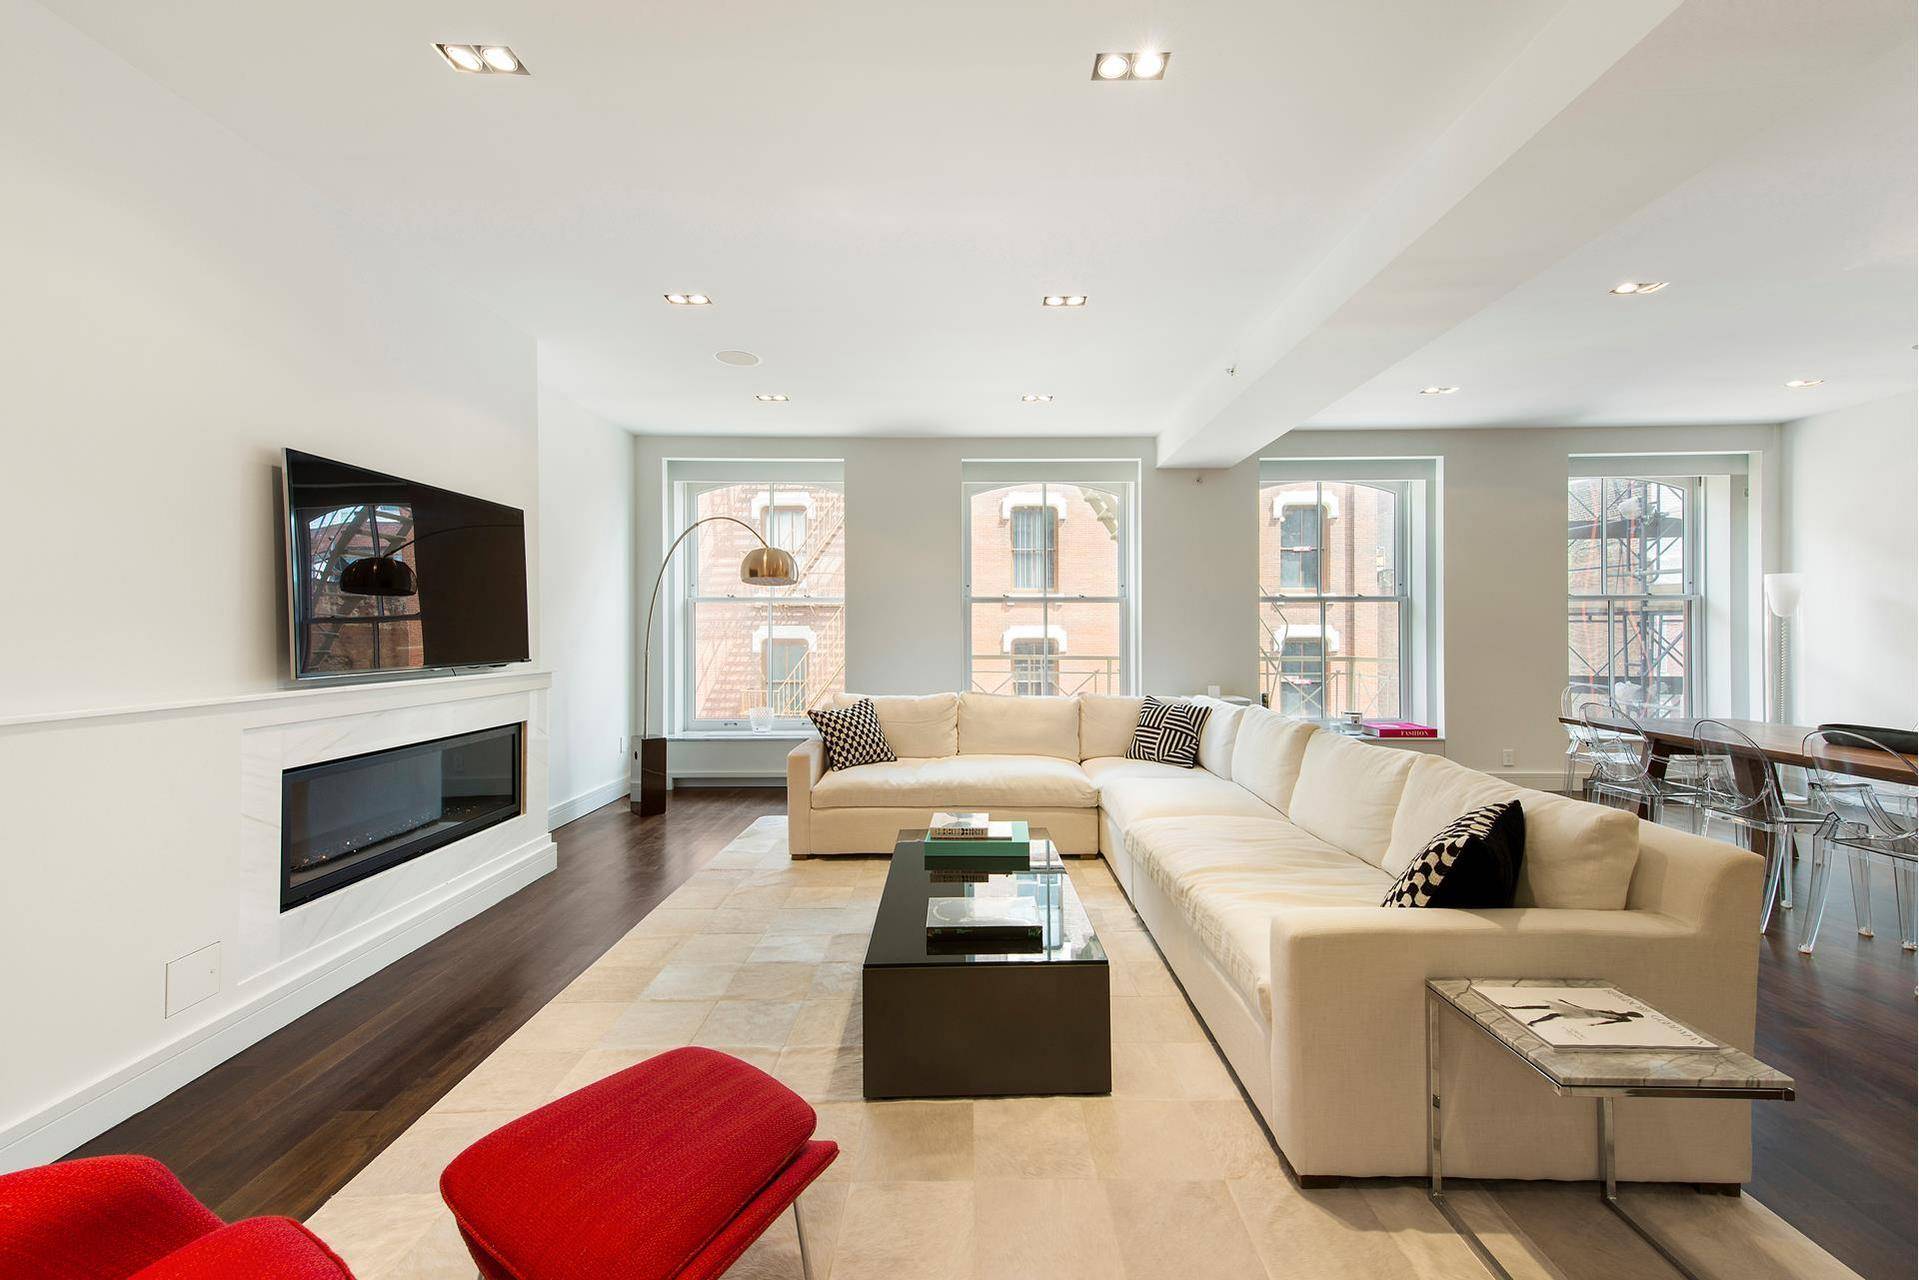 A Dream Loft ! Masterfully redeveloped Loft Building on the most iconic street in Historic Cast Iron Soho.